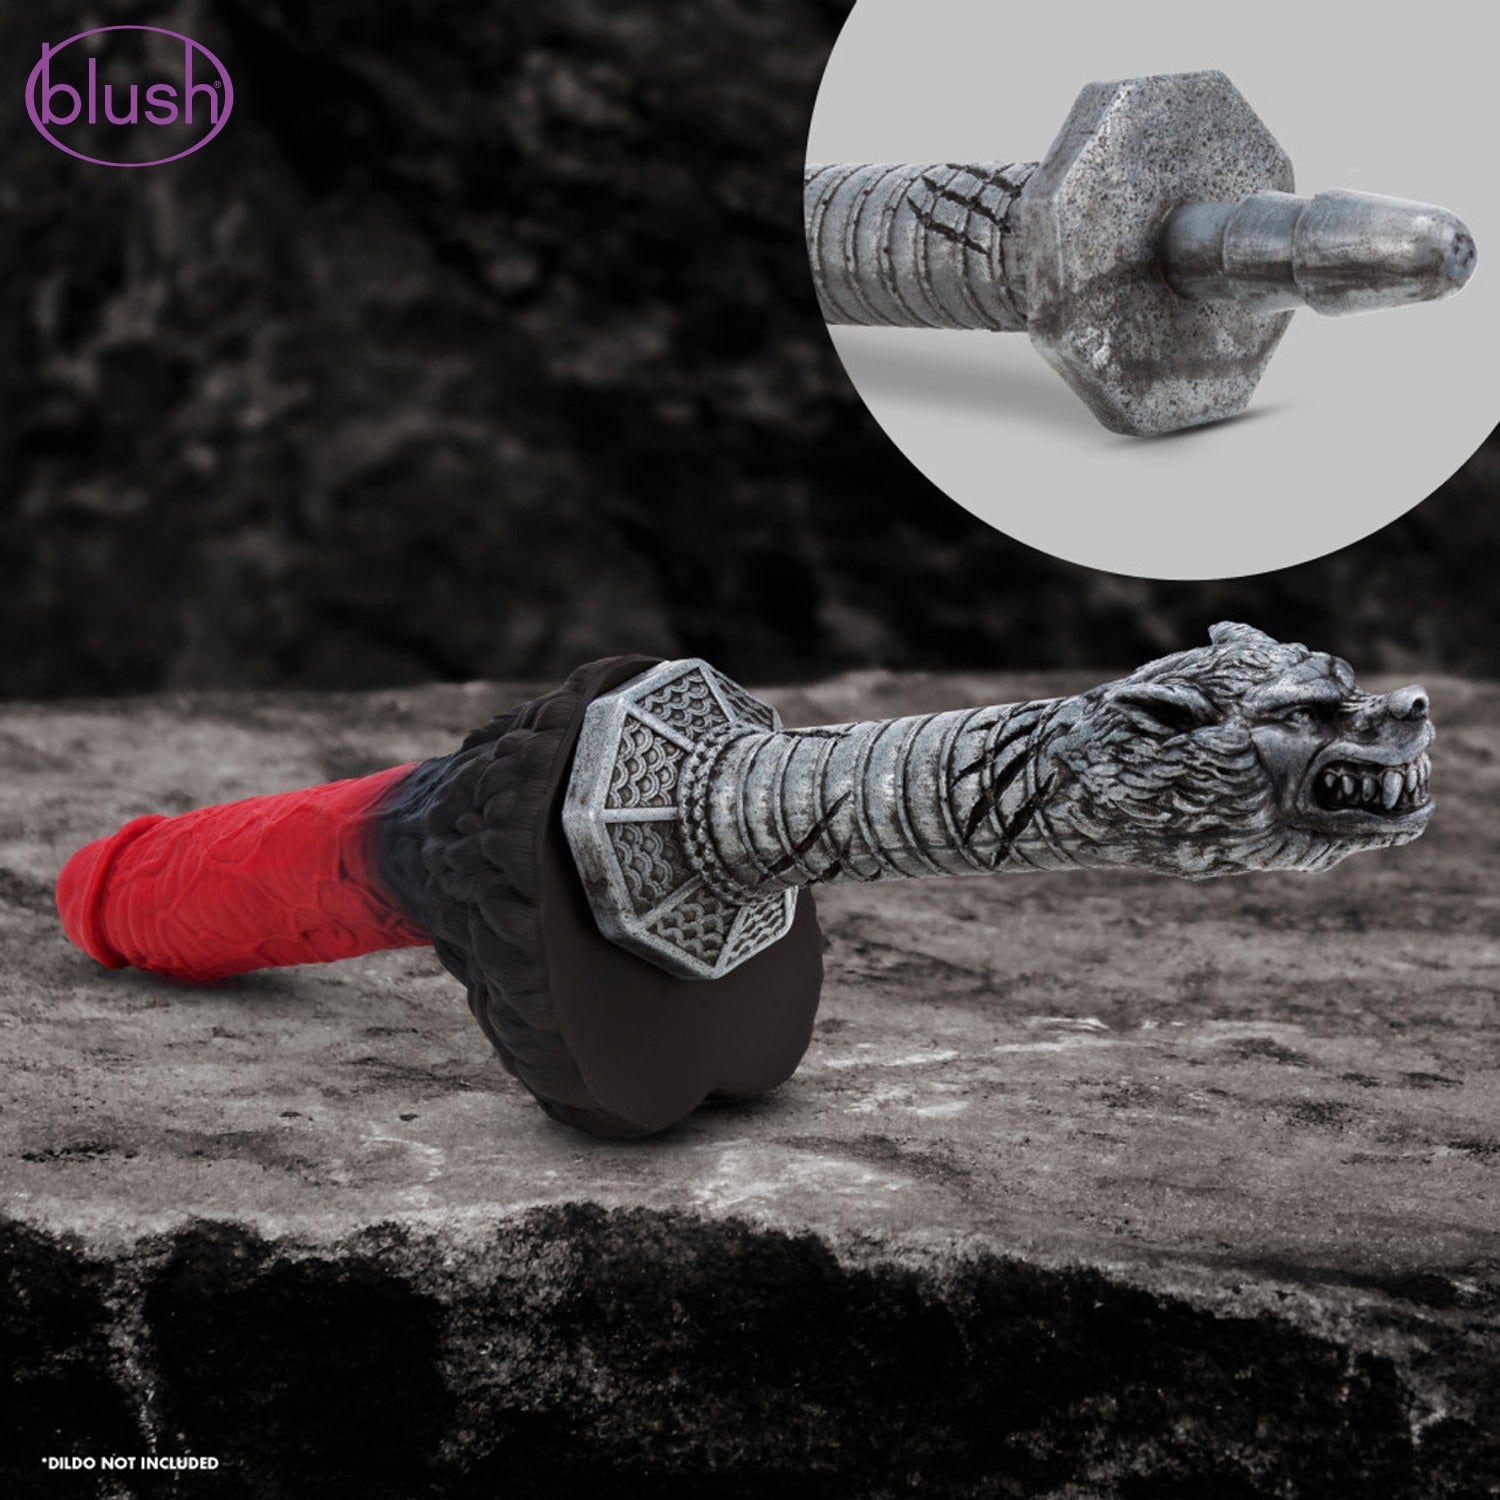 An image of the blush The Realm Rougarou Locked on the Lycan Warewolf Dildo, laying on a rocky surface. In the top right is a close up of the Lock On part of the handle, and in the bottom left "Dildo not included". On the top left is the blush logo.